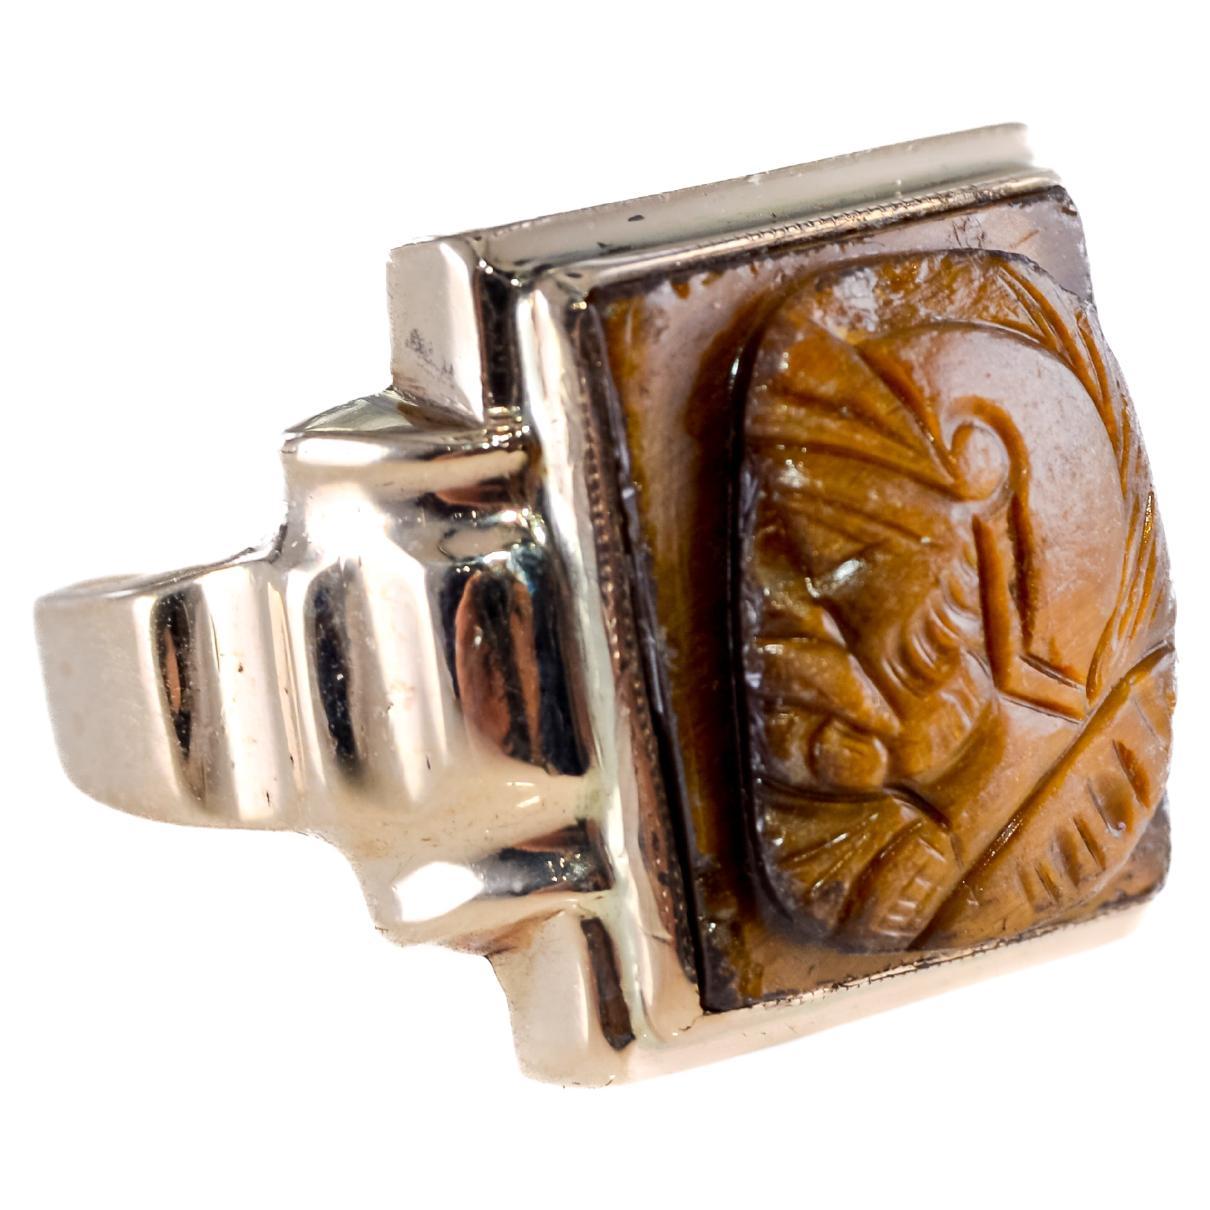 UNISEX RING
STYLE / REFERENCE: Art Deco Ring
METAL / MATERIAL: 10Kt. Solid Gold
CIRCA / YEAR: 1940's
CENTER STONE / WEIGHT: Tiger Eye or Metamorphic Chalcedony 
SIZE: 9

This unique ring is entirely hand made with a hand carved center stone. the